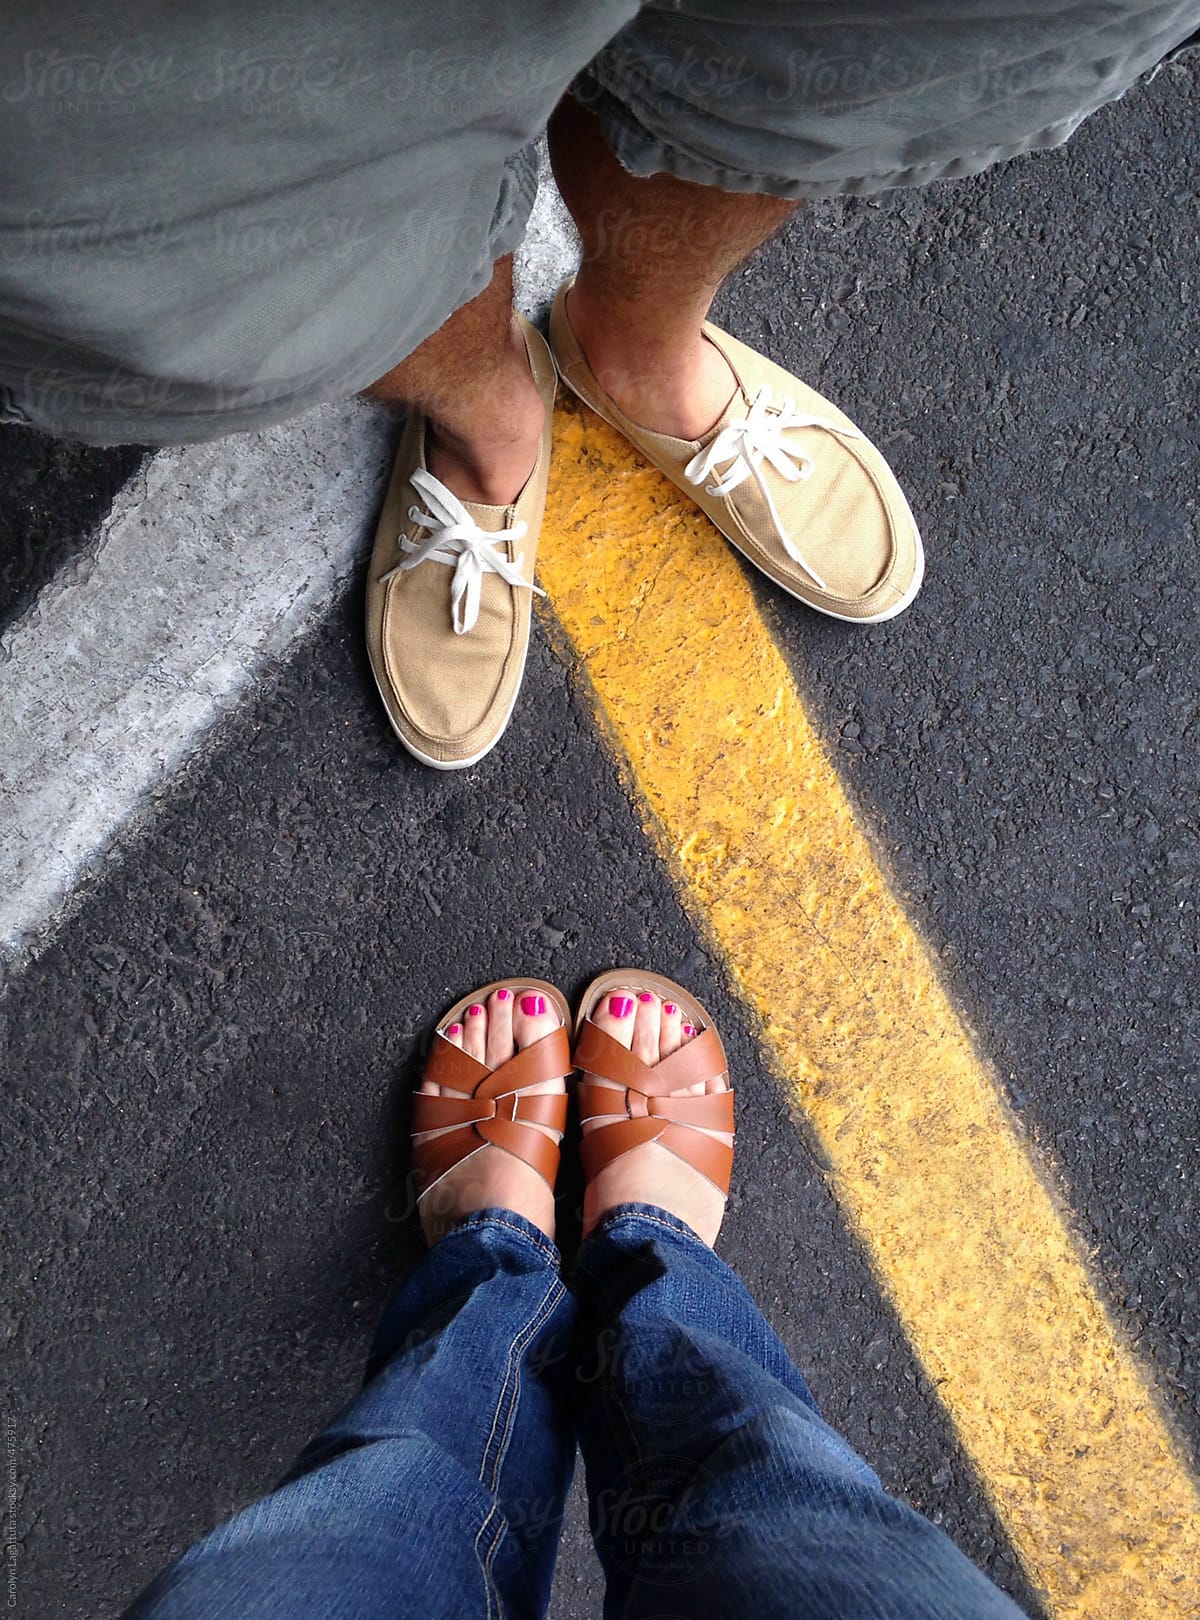 Couple\'s feet at what seem to be a crossroads